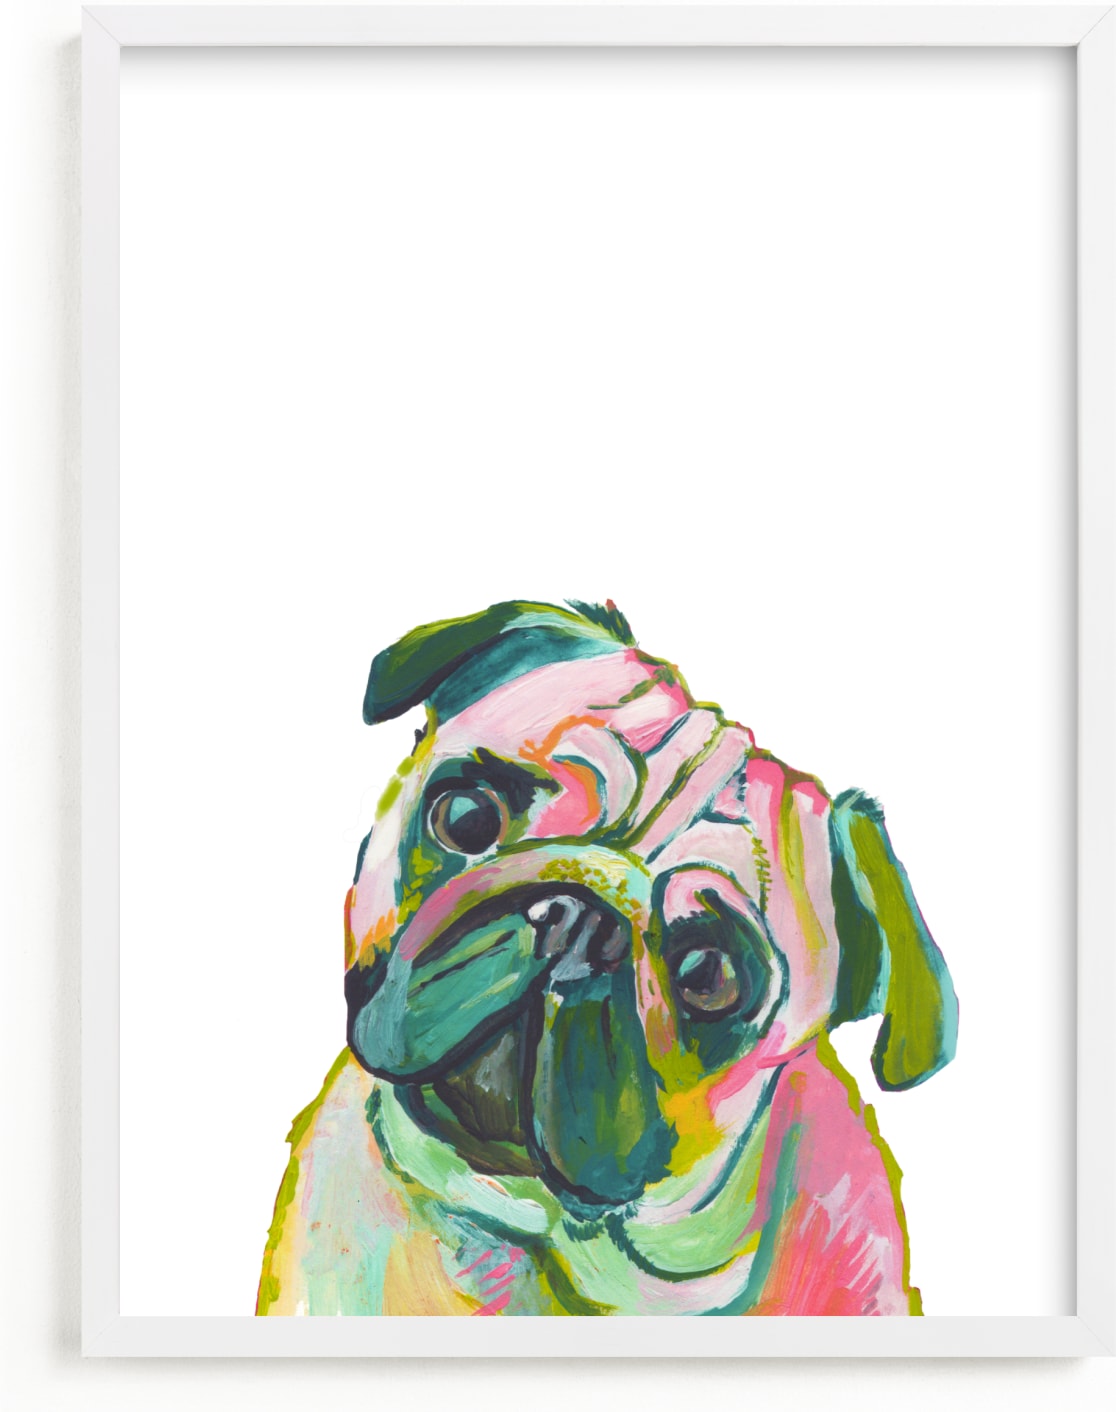 This is a colorful kids wall art by Makewells called Mr. Pug.